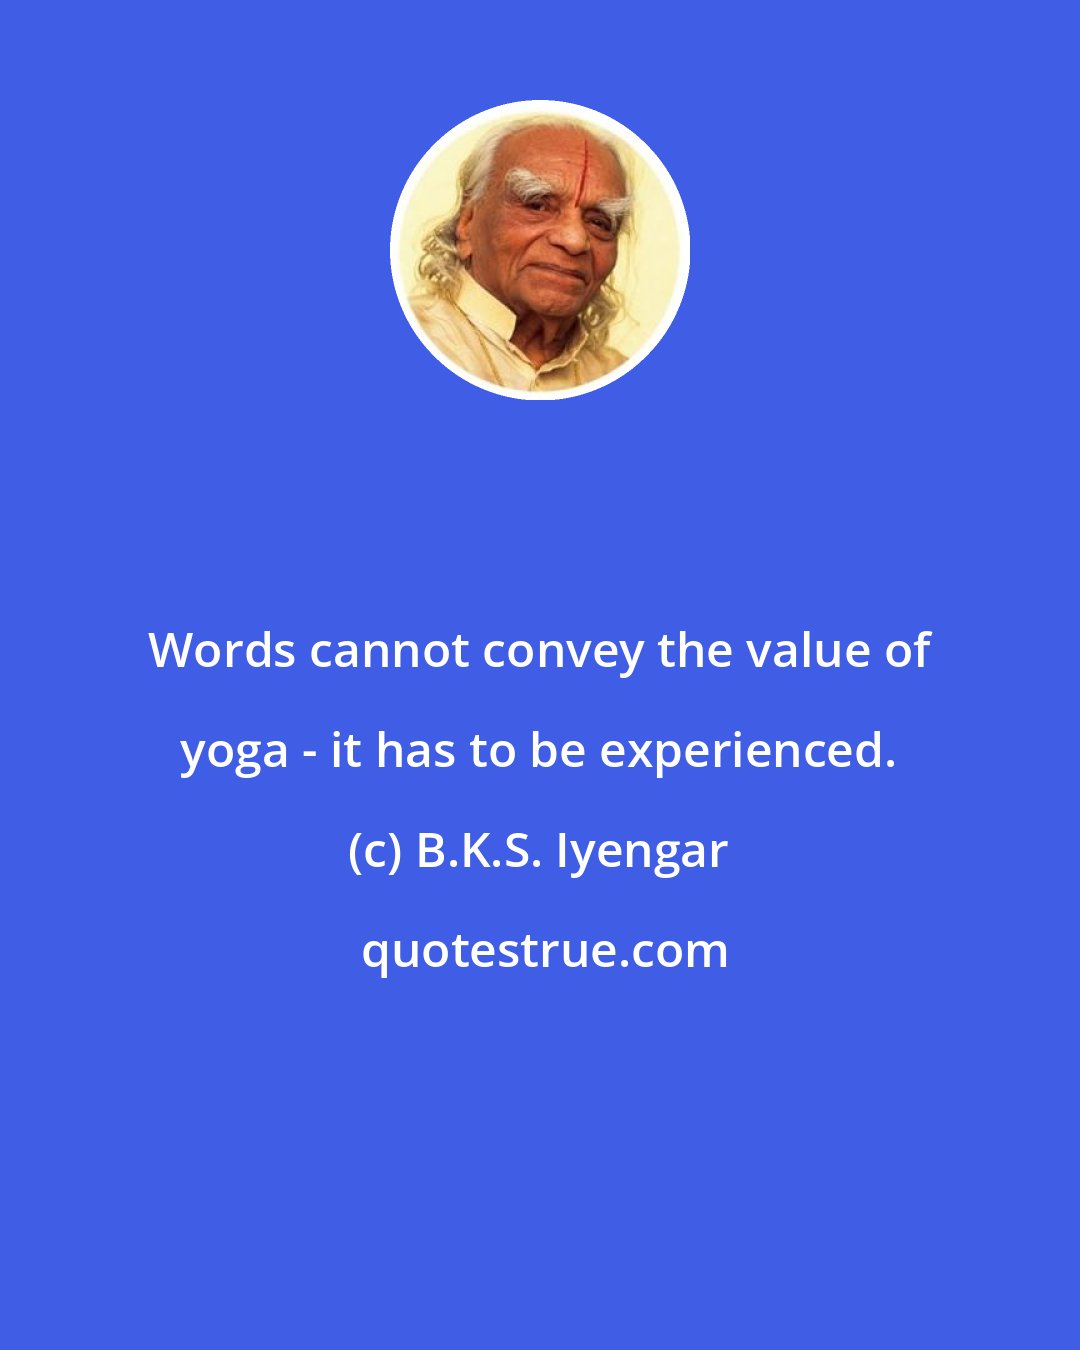 B.K.S. Iyengar: Words cannot convey the value of yoga - it has to be experienced.